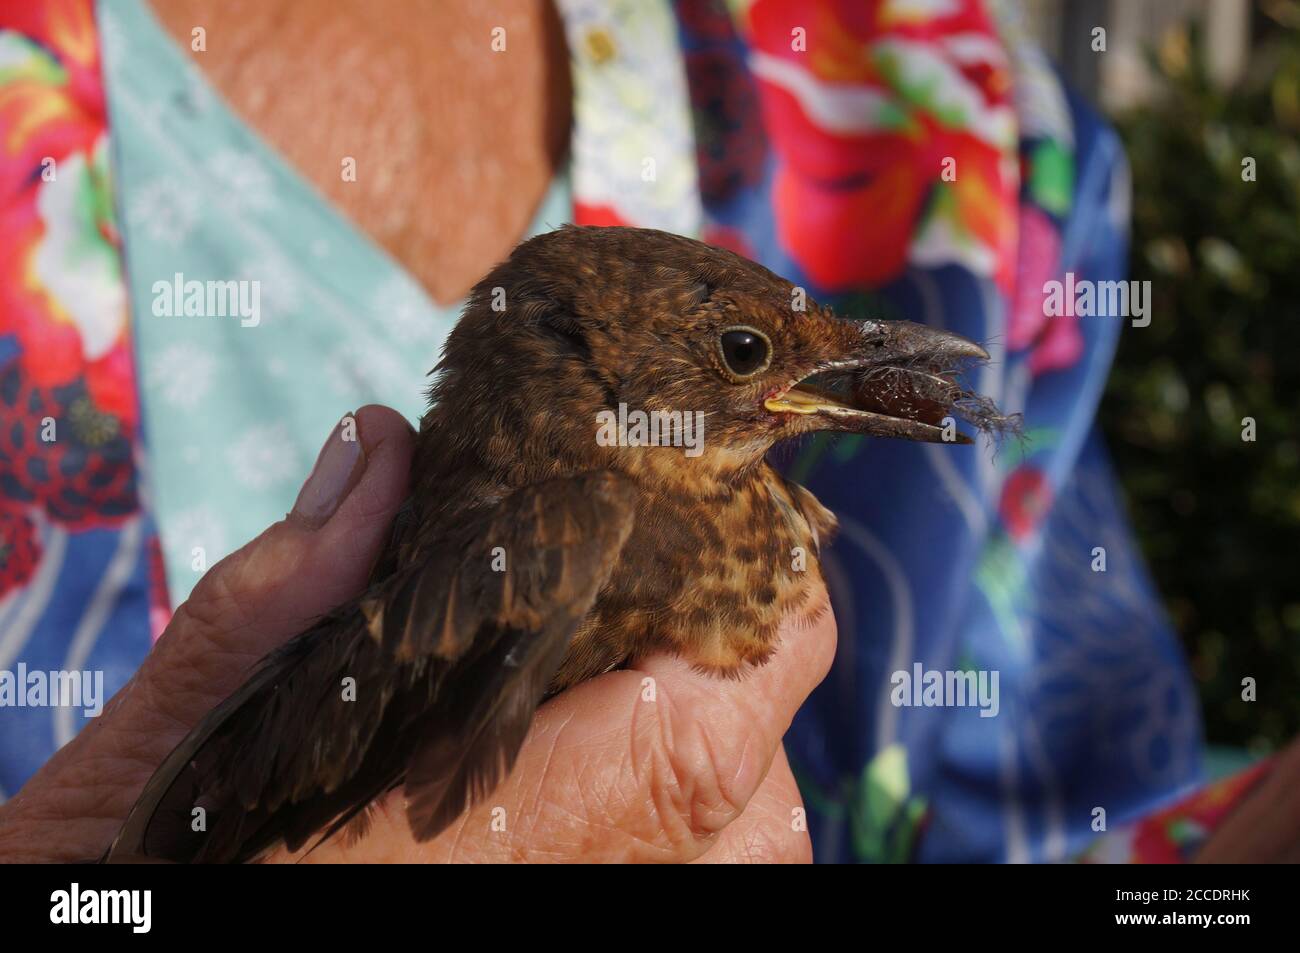 Close up of Injured young bird with food in its beak while being hand fed  by a caring human Stock Photo